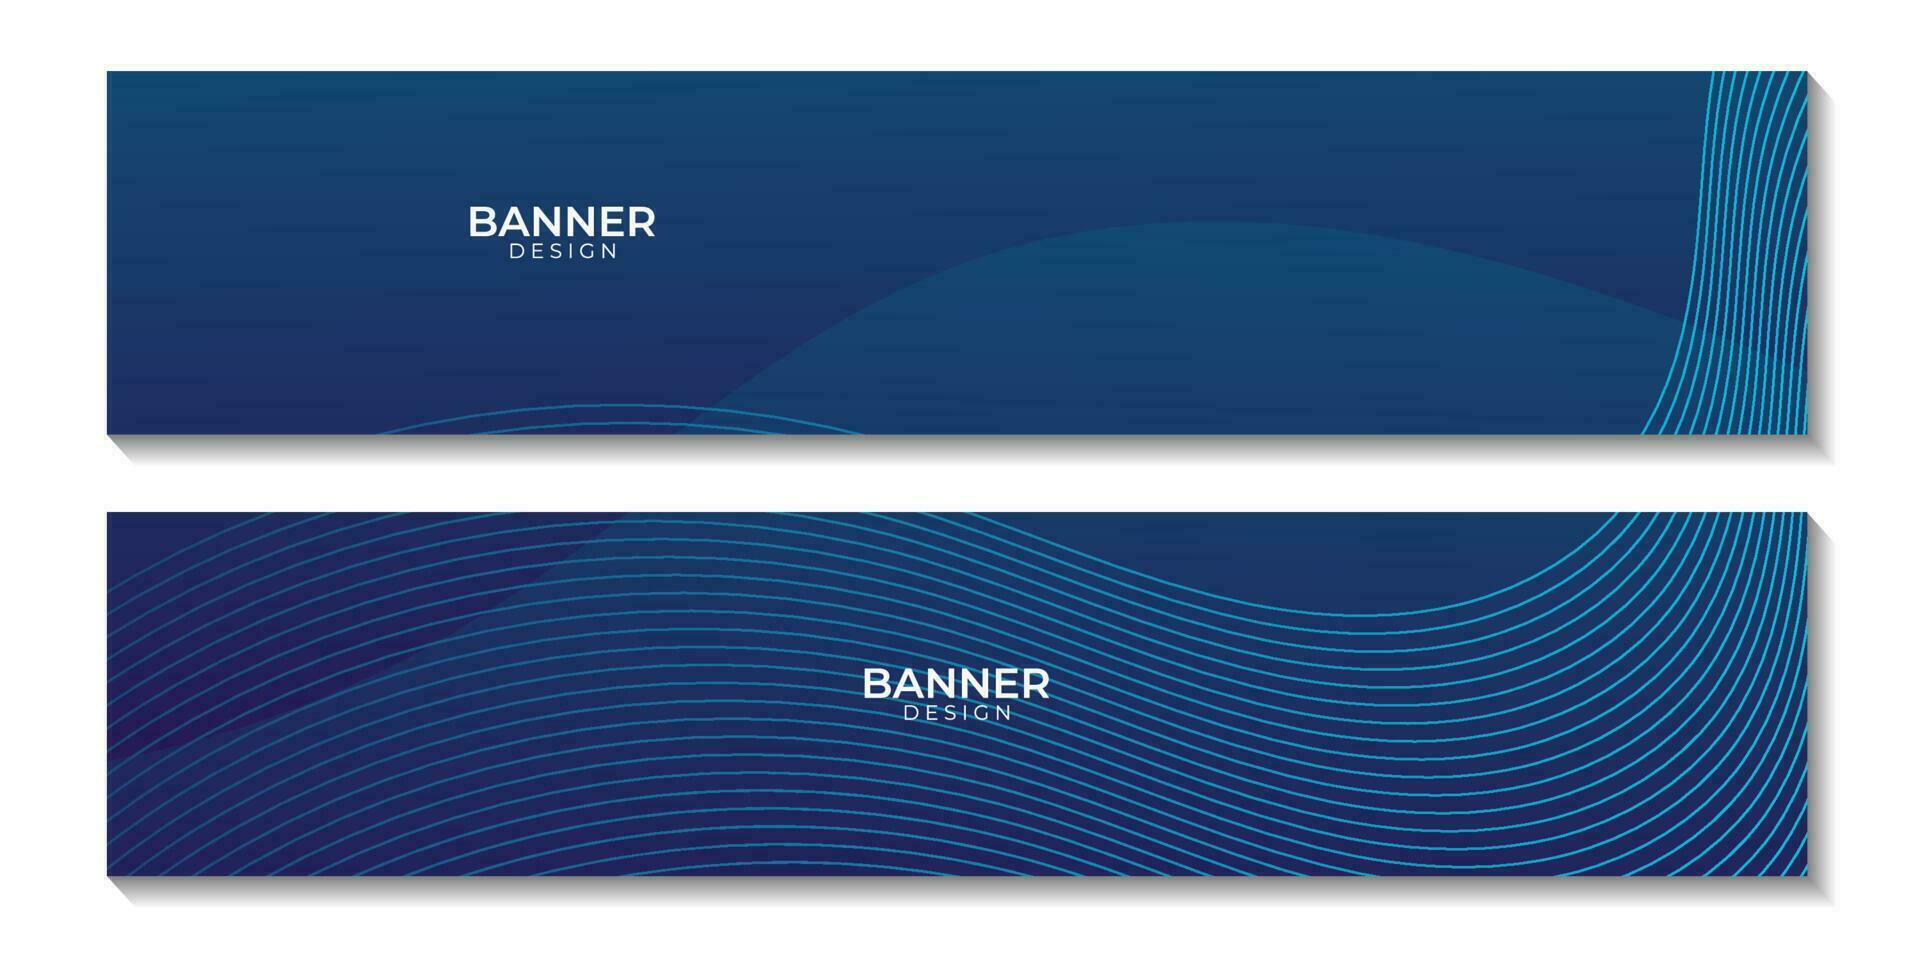 set of banners with dark blue wave background vector illustration